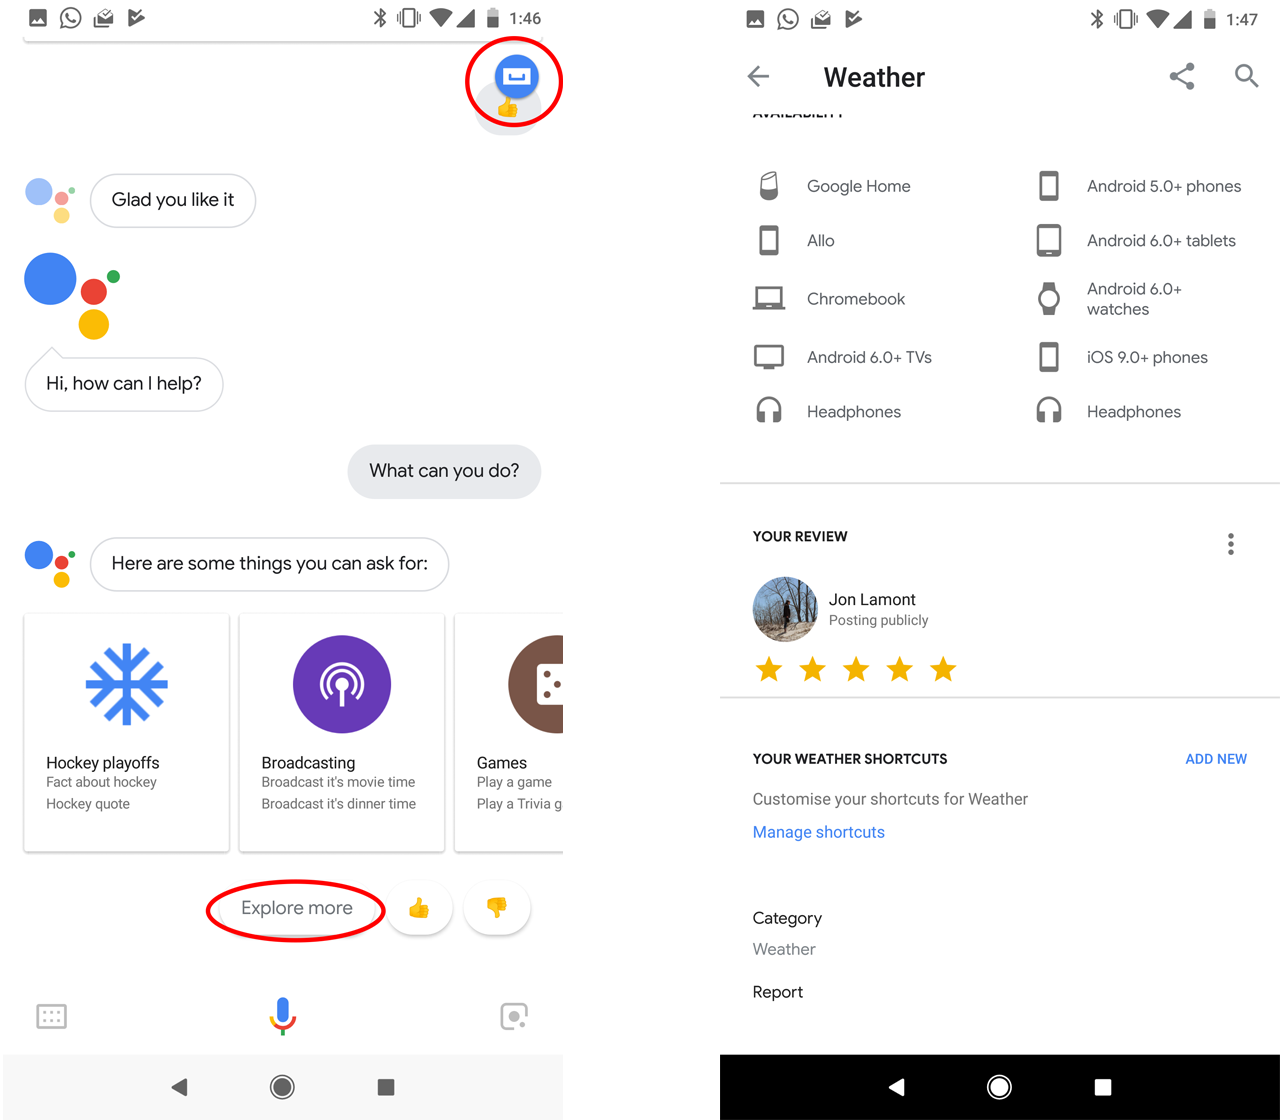 how-to access Google Assistant's review section